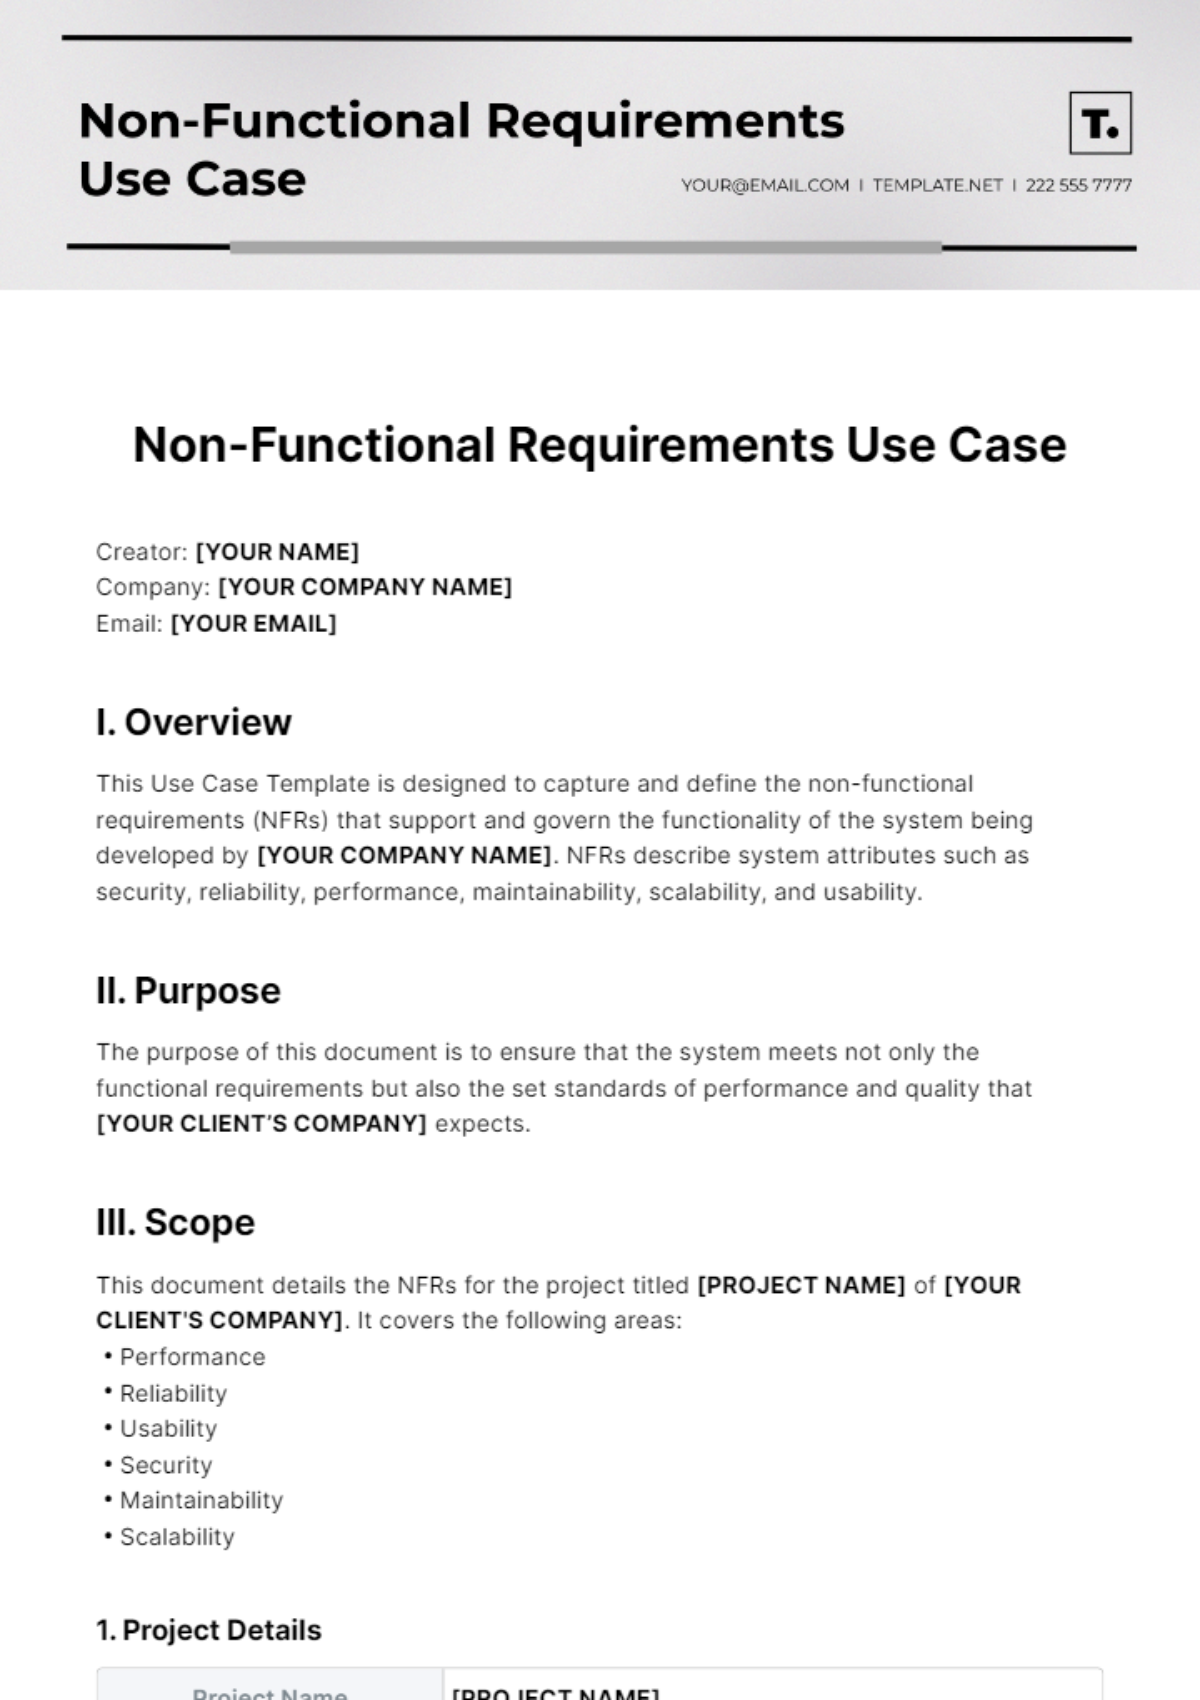 Free Non-Functional Requirements Use Case Template